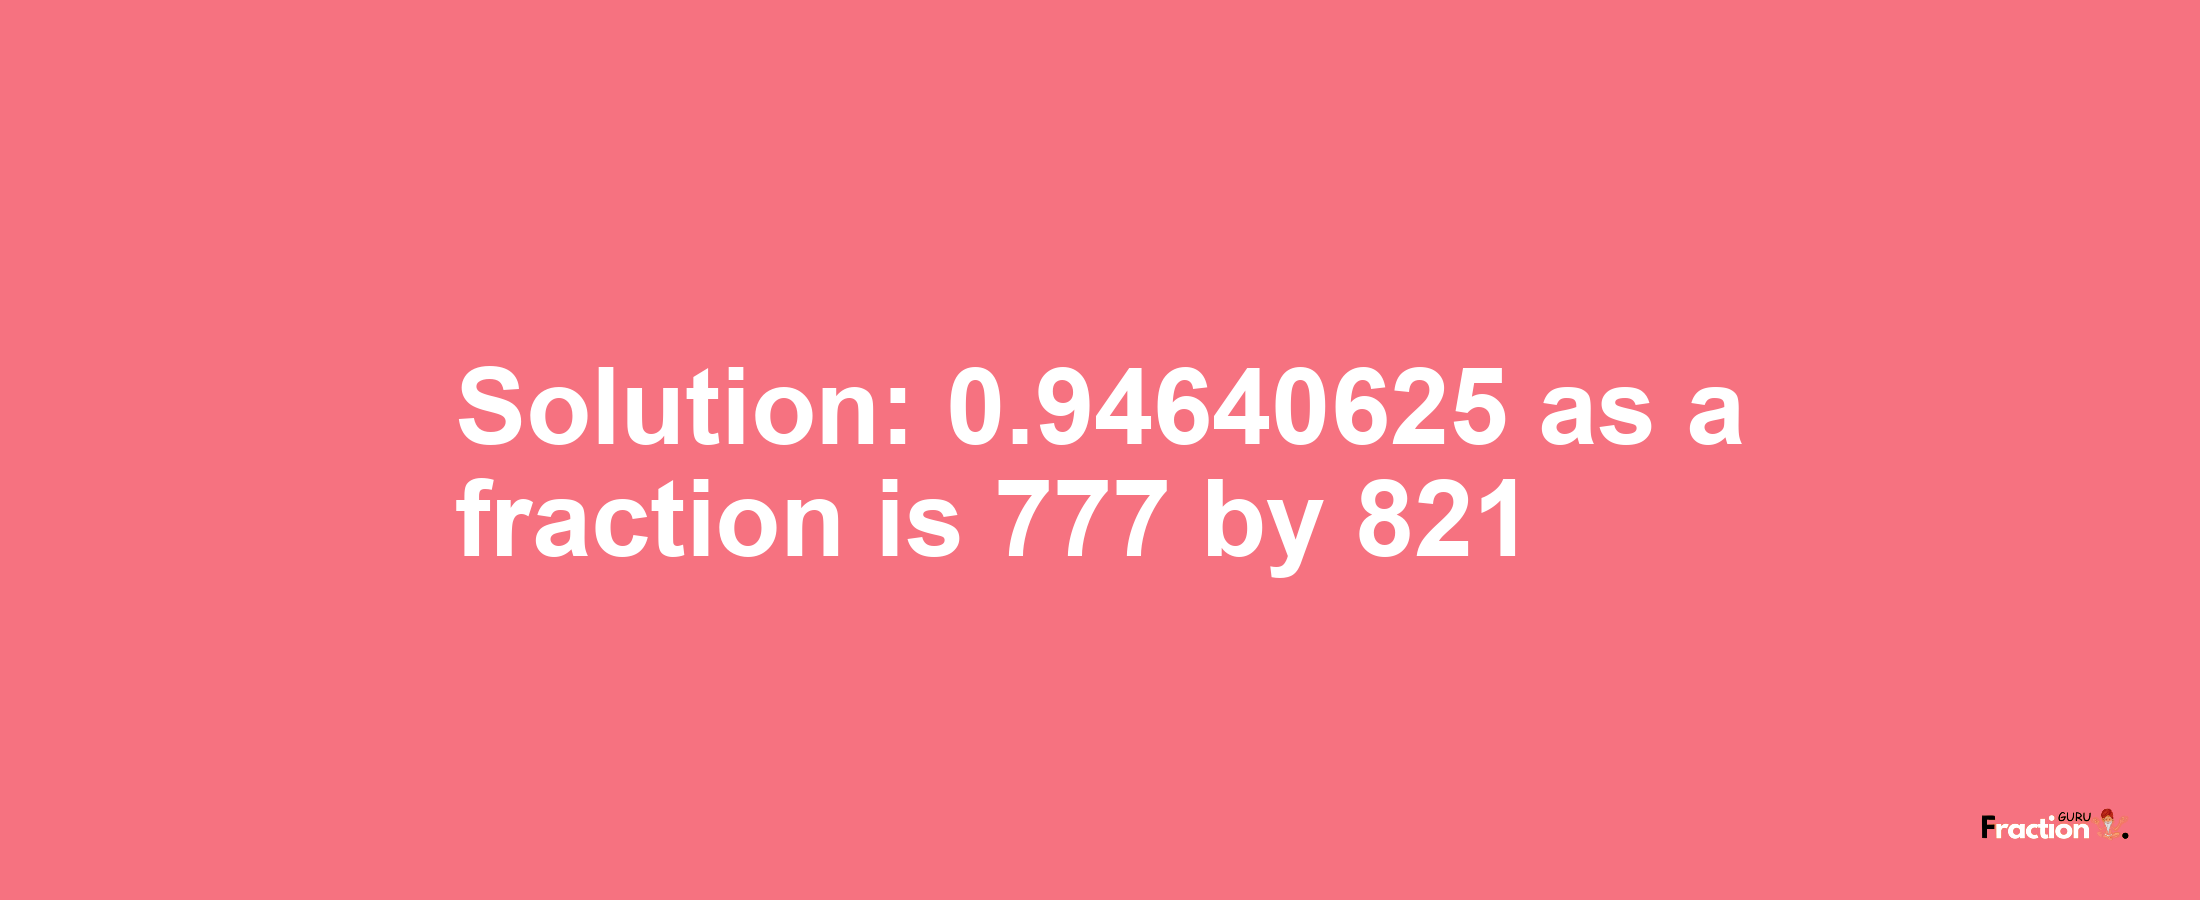 Solution:0.94640625 as a fraction is 777/821